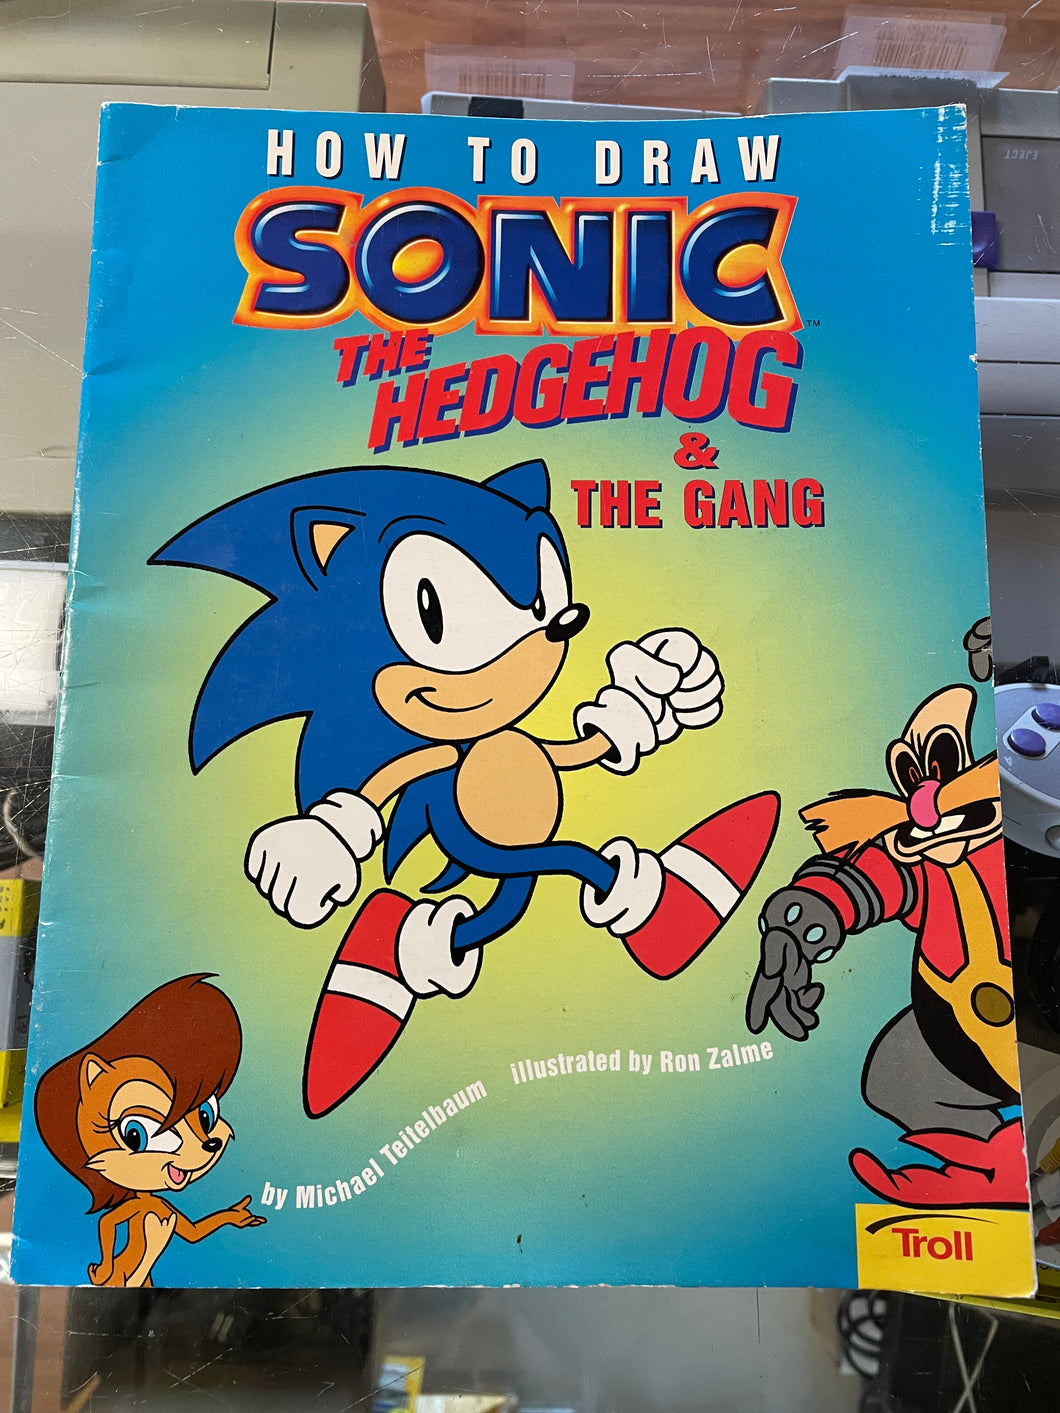 How to Draw Sonic the Hedgehog and the Gang VTG 1998 Troll by Michael Teitelbaum